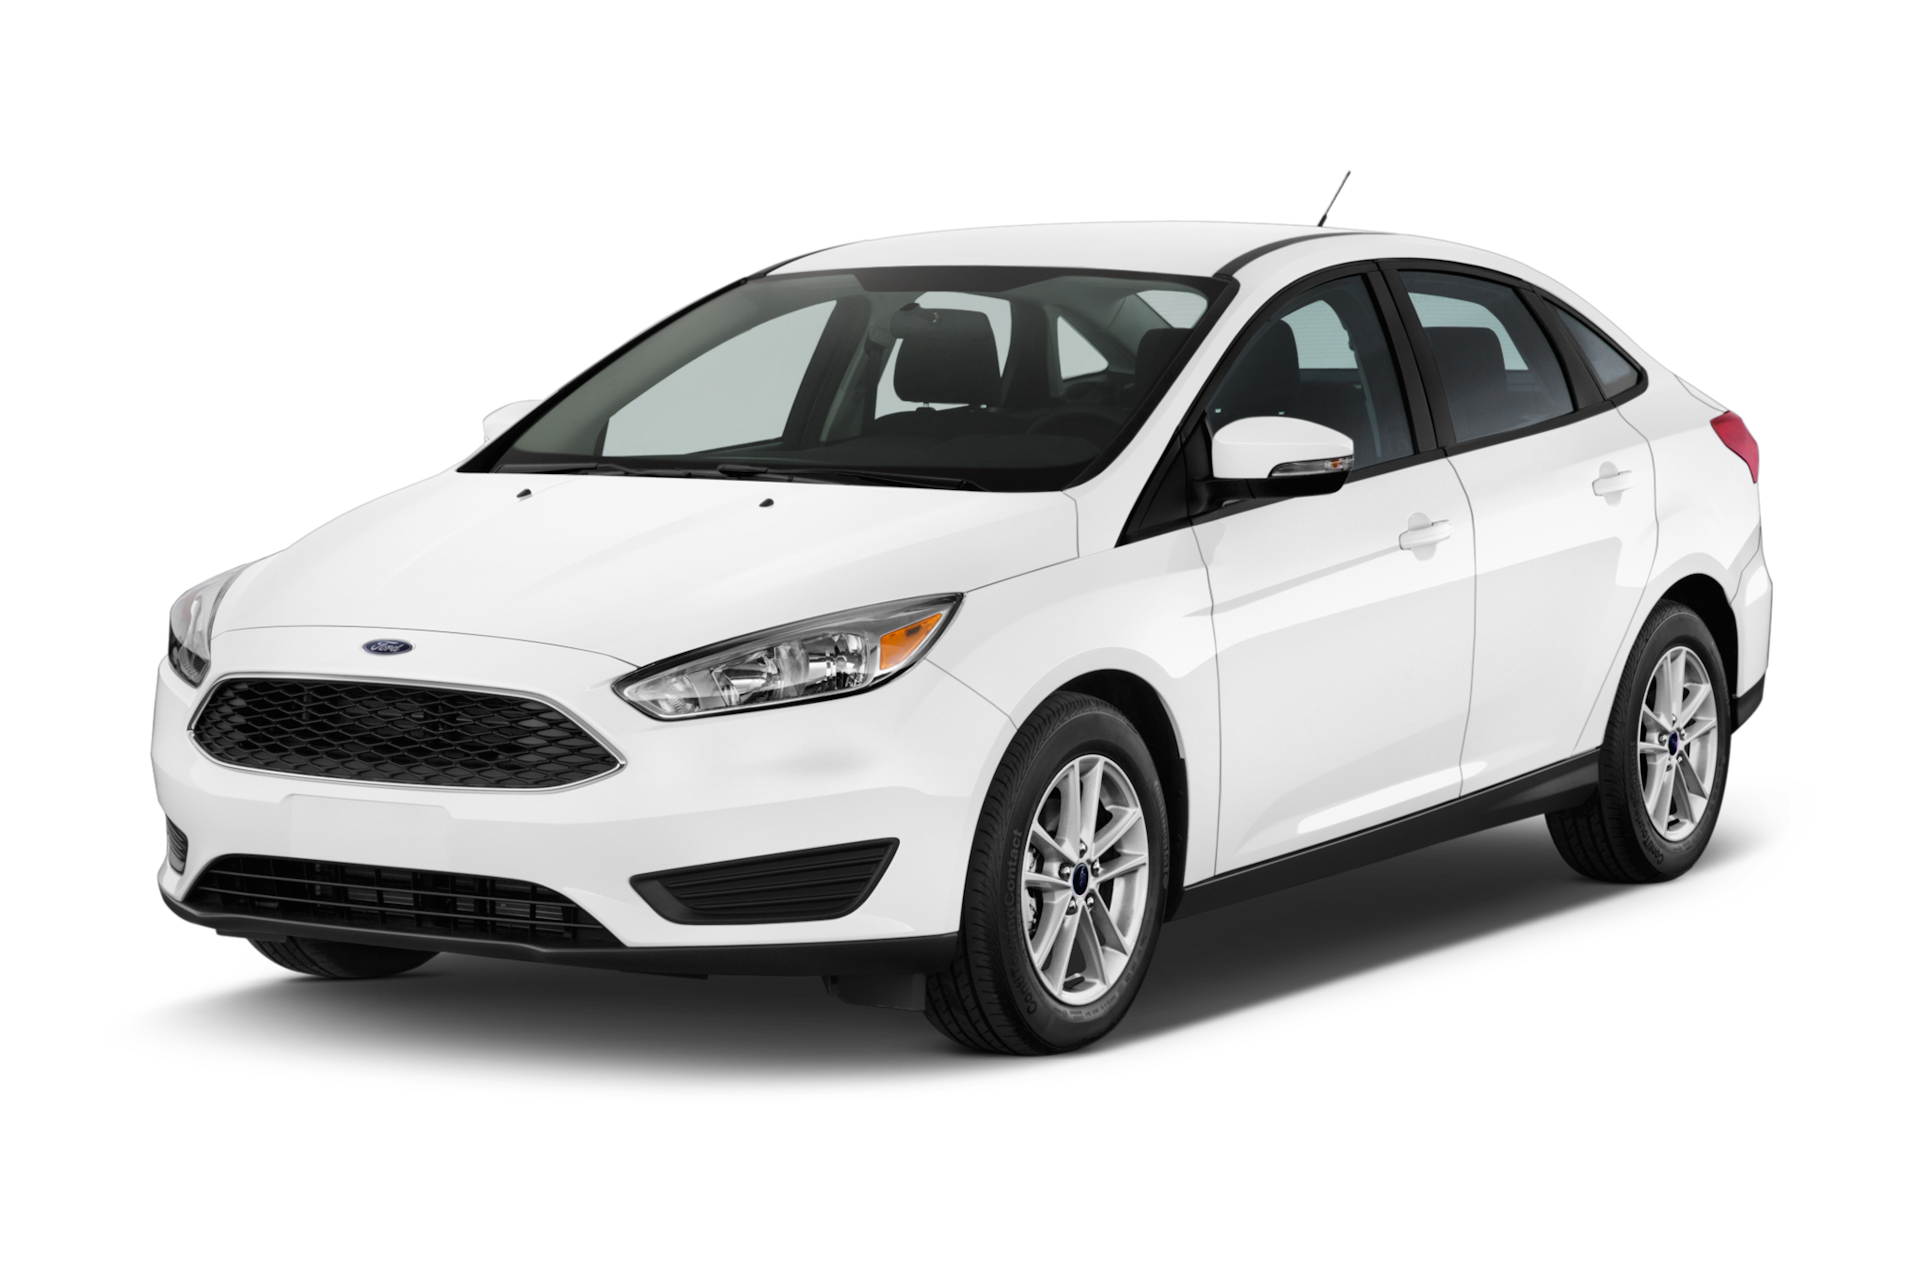 2015 Ford Focus Prices, Reviews, and Photos - MotorTrend